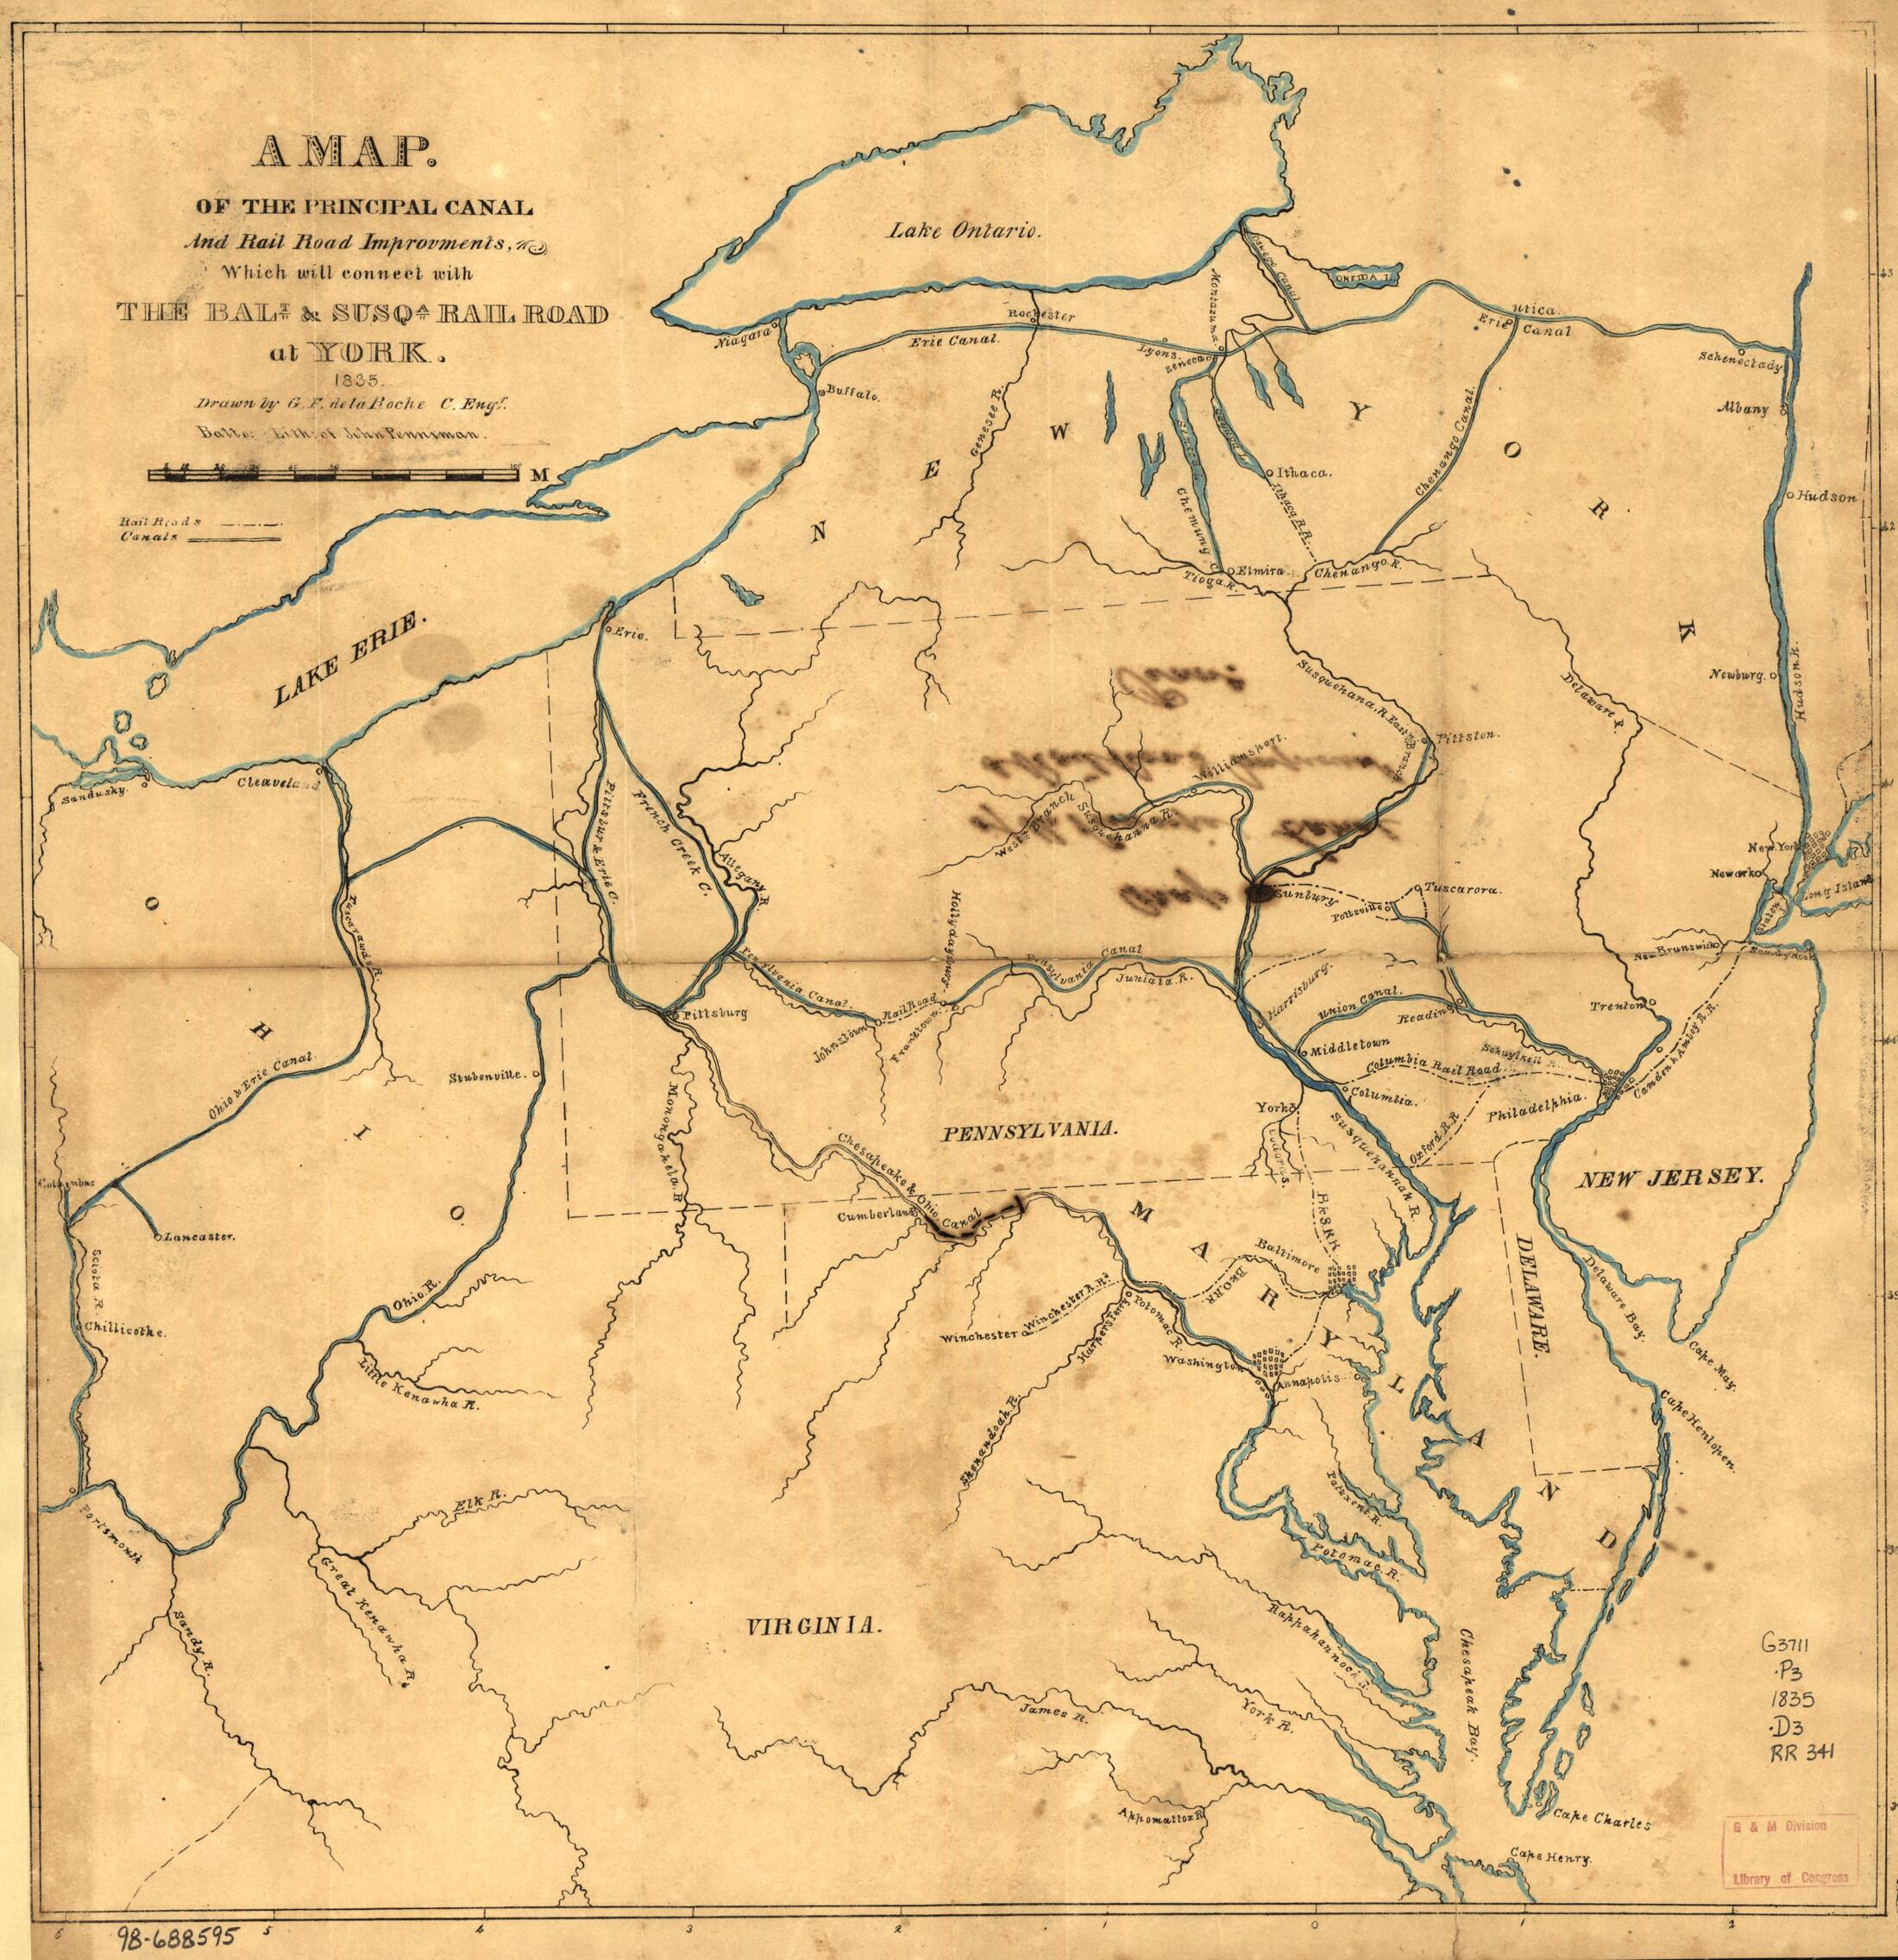 This old map of A Map, of the Principal Canal and Rail Road Improvments sic, Which Will Connect With the Balt. &amp; Susqa. Rail Road at York; Drawn by G. F. De La Roche. C. Engr from 1835 was created by  Baltimore and Susquehanna Railroad Company, G. F. De 